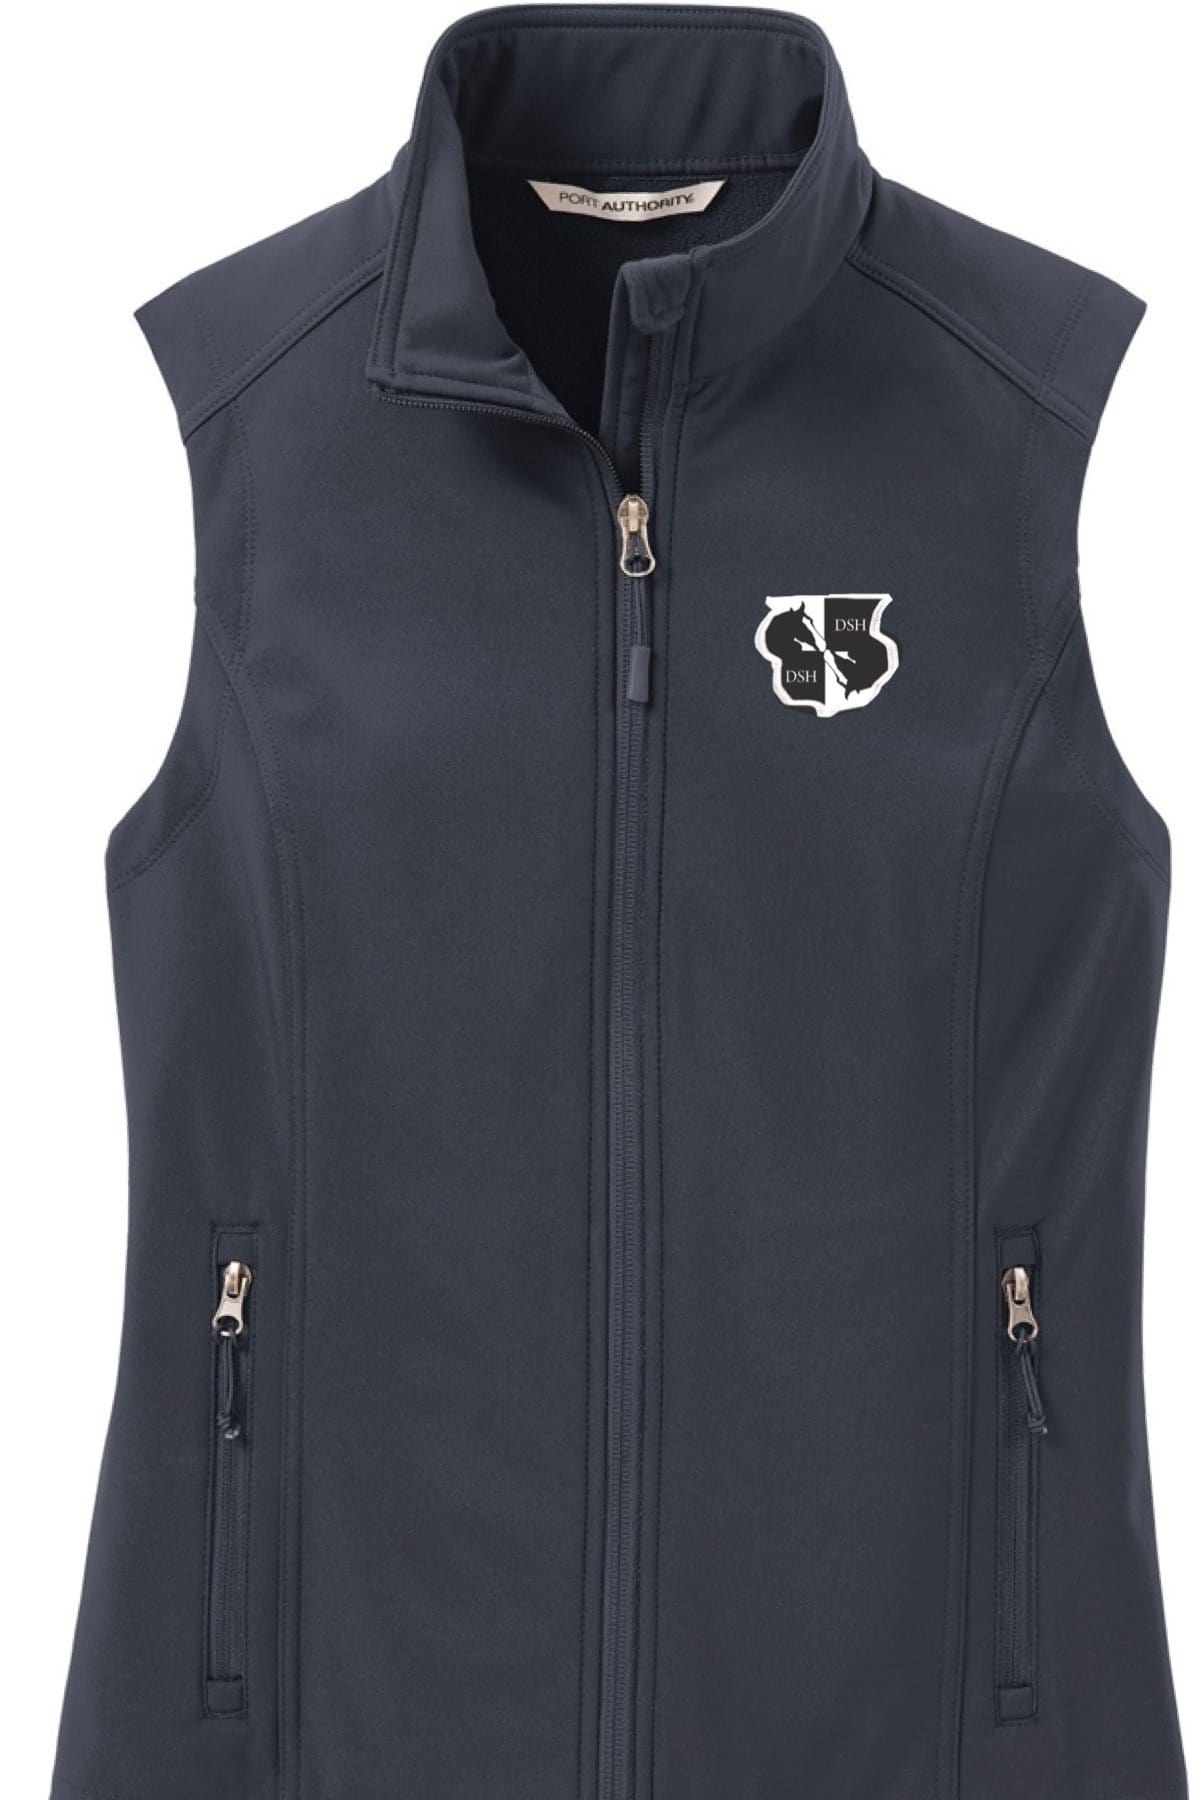 Equestrian Team Apparel Custom Team Jackets DSH VEST equestrian team apparel online tack store mobile tack store custom farm apparel custom show stable clothing equestrian lifestyle horse show clothing riding clothes horses equestrian tack store